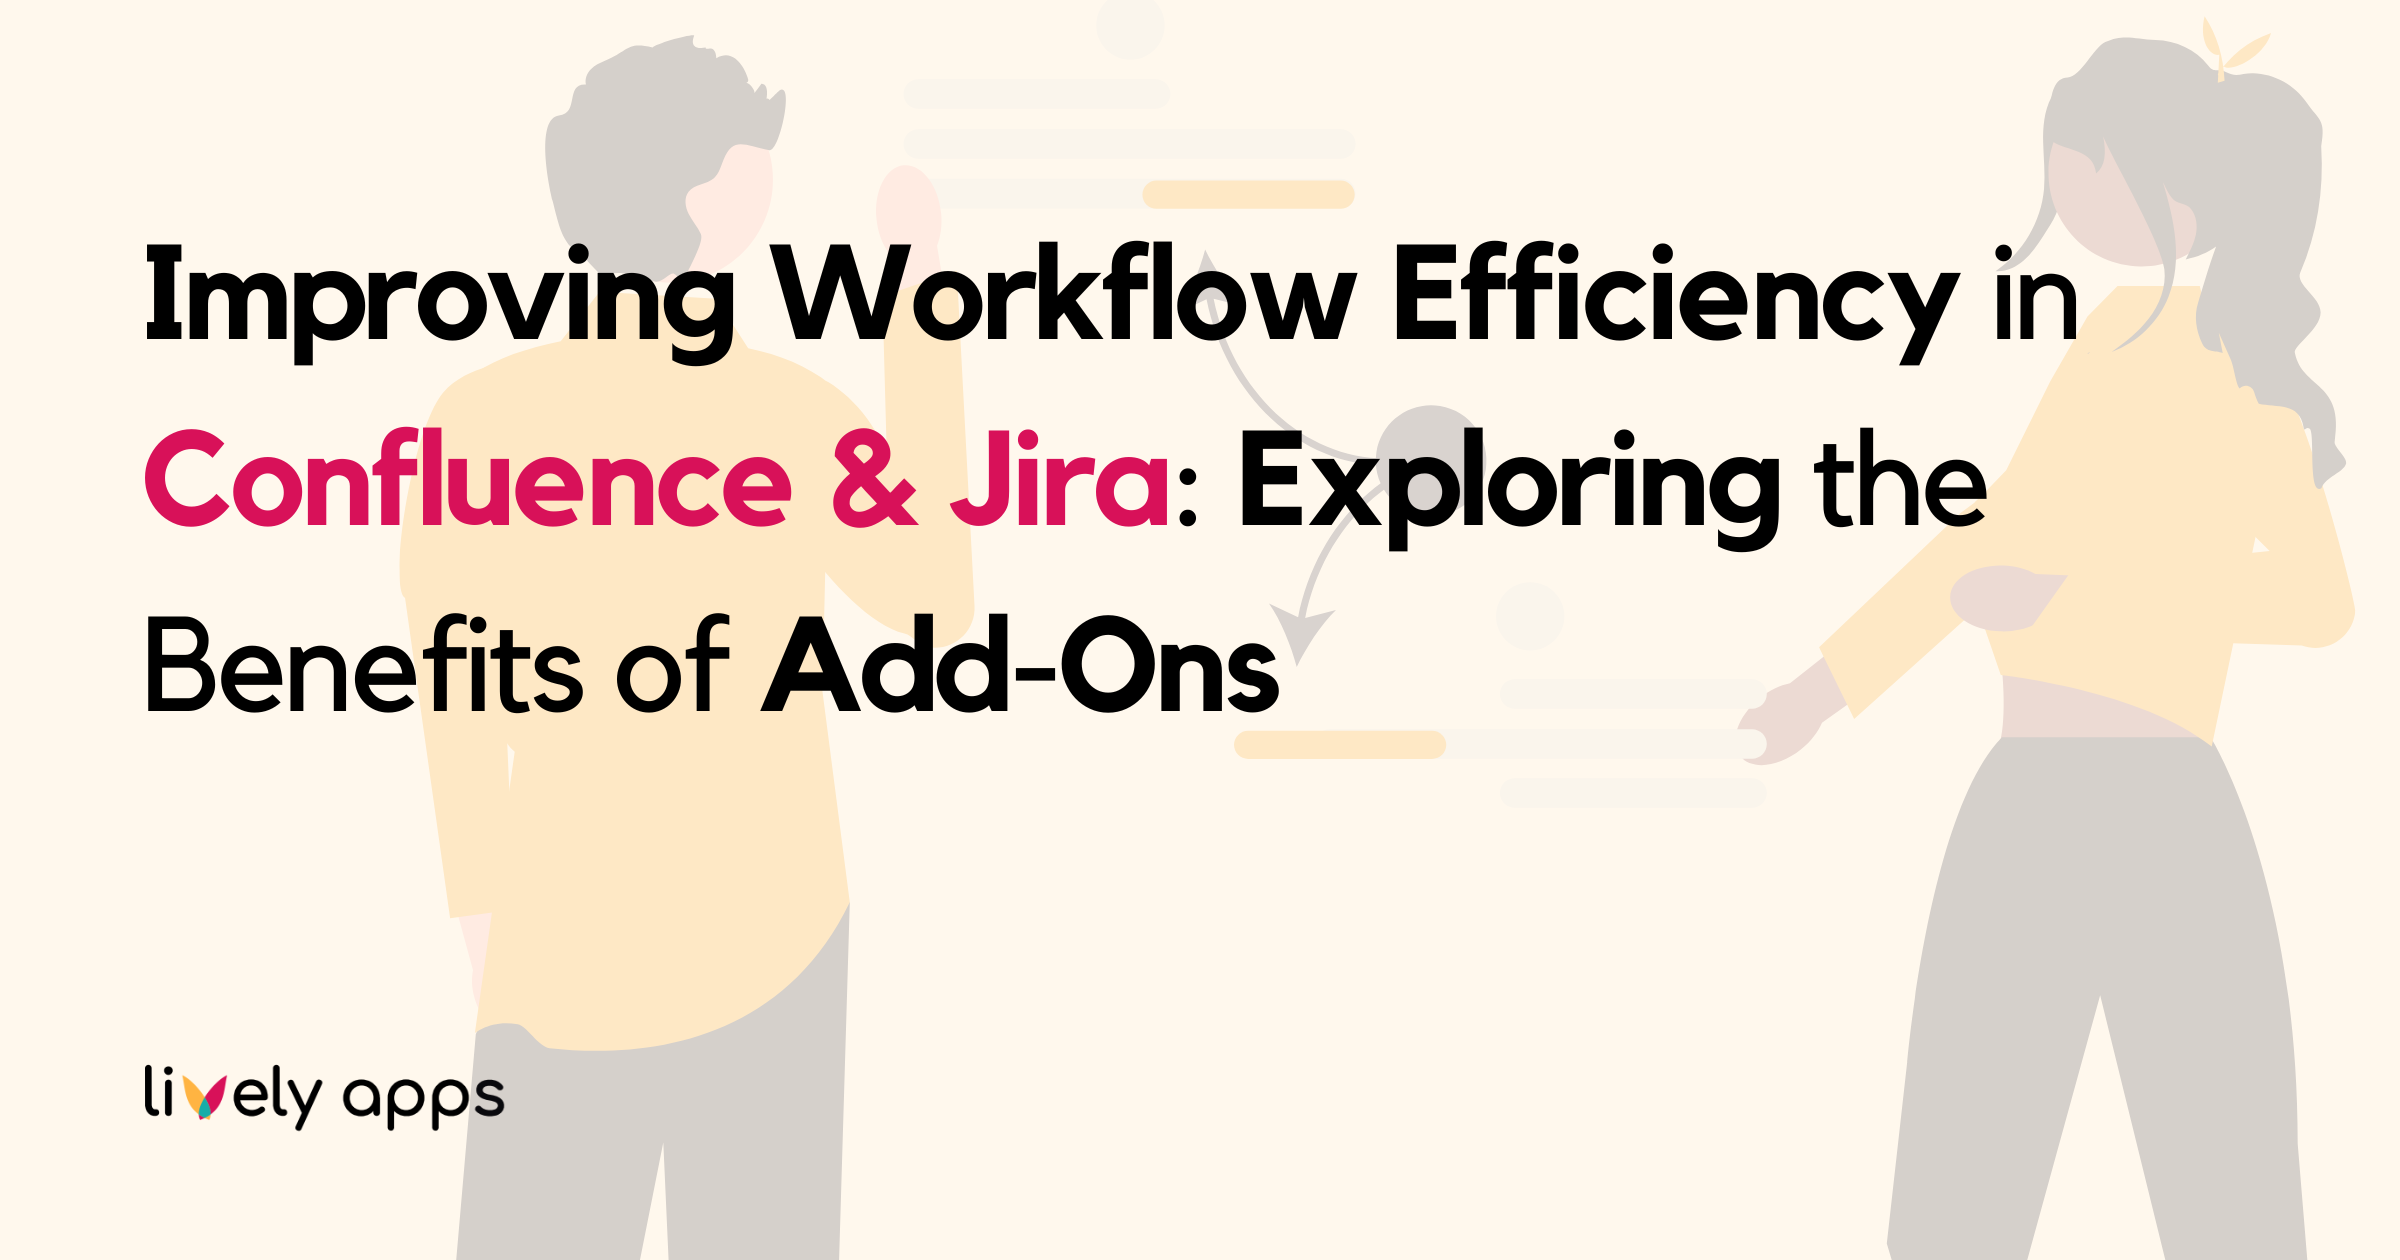 Improving Workflow Efficiency in Confluence & Jira: Exploring the Benefits of Add-Ons